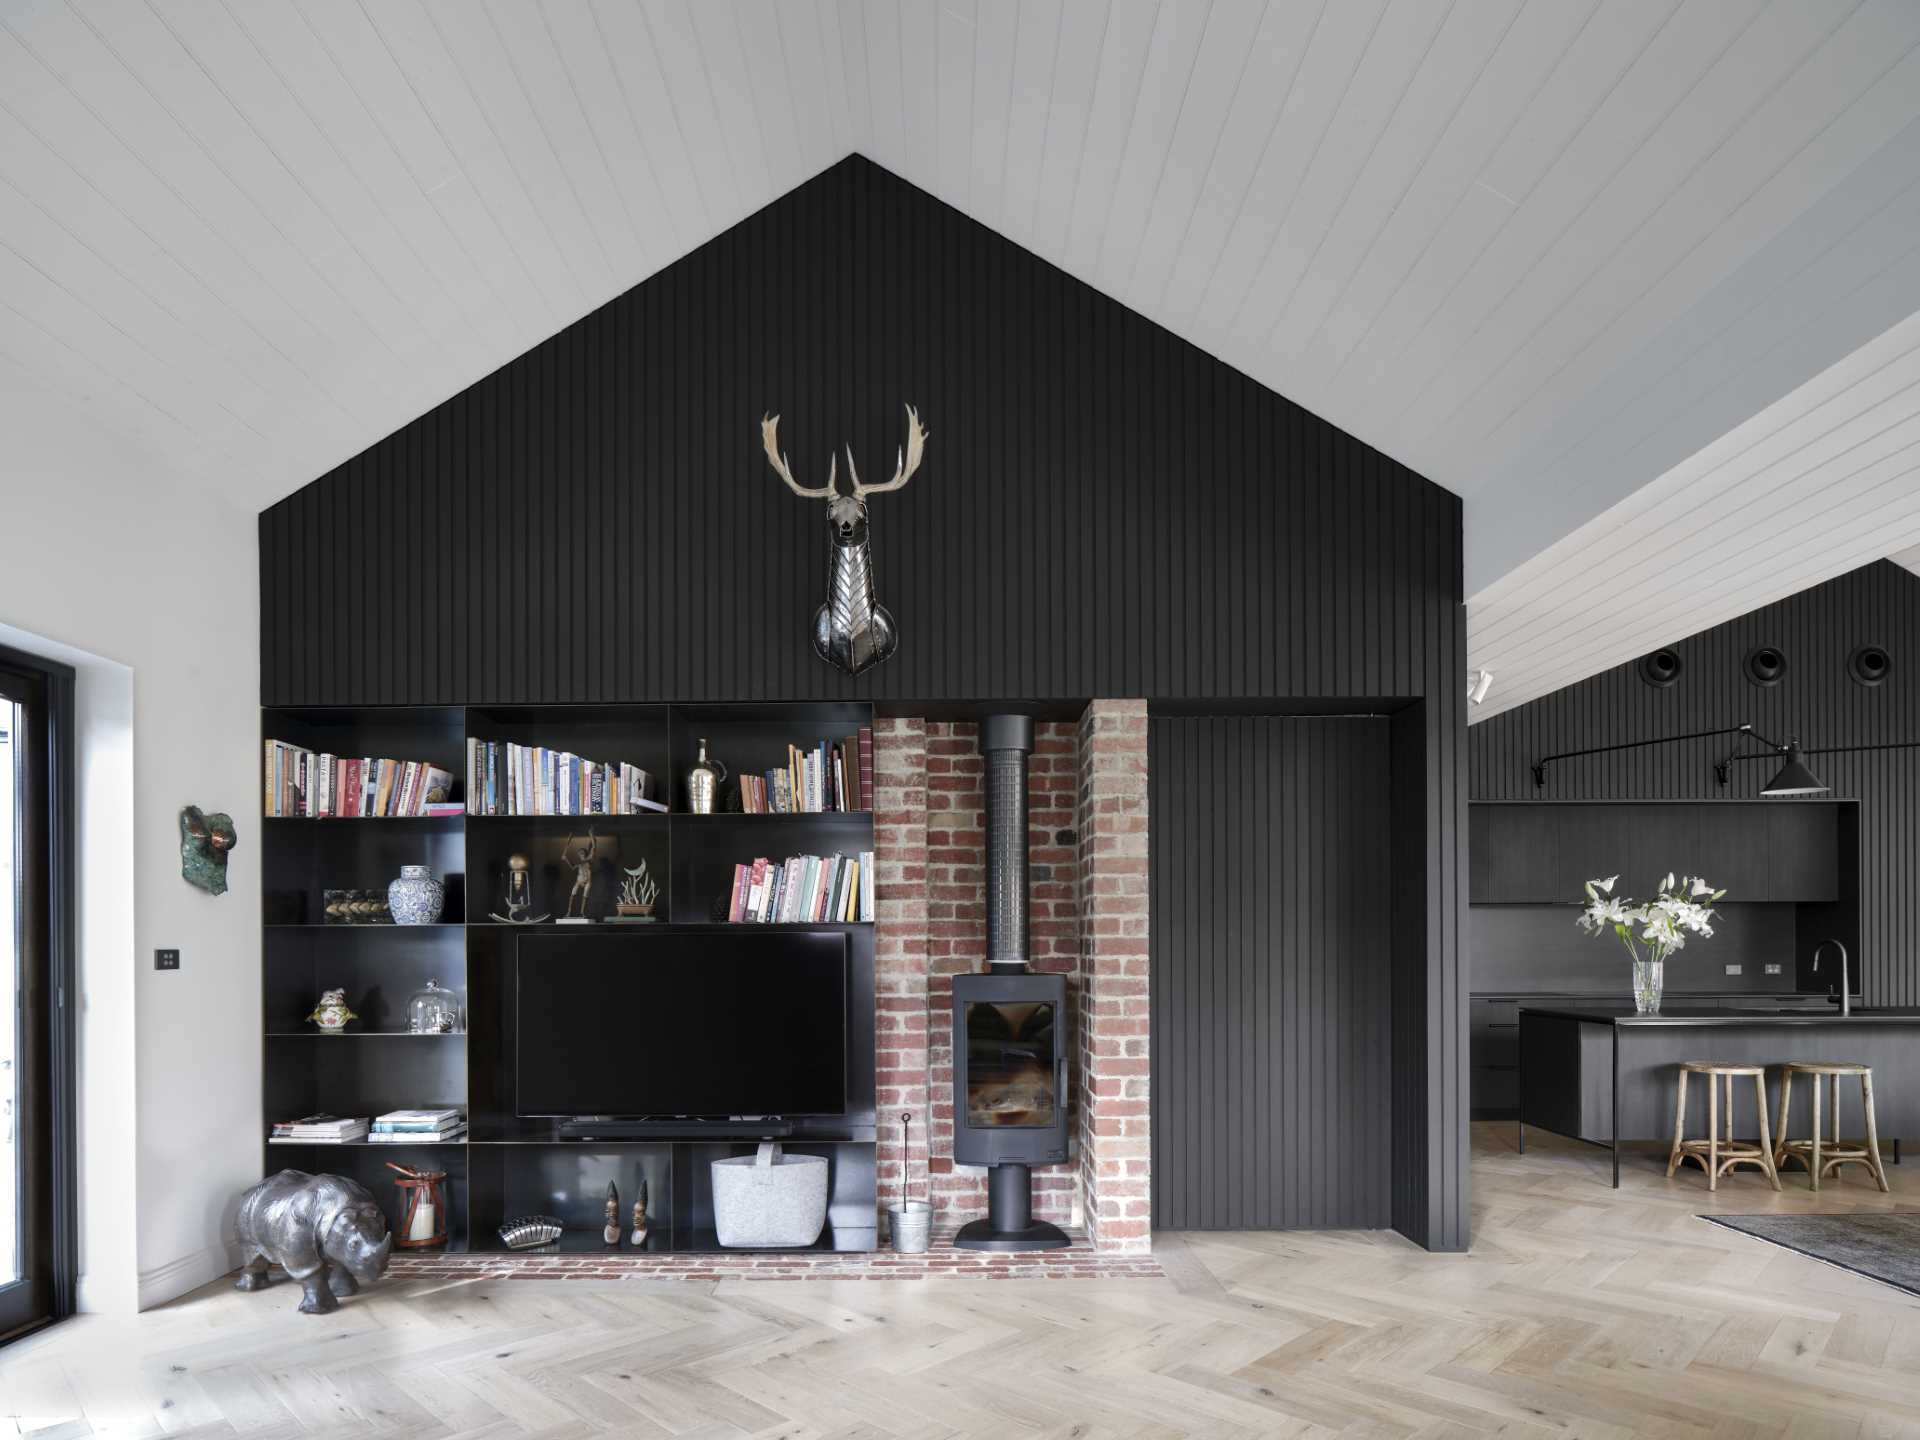 The black design of the kitchen is also utilized in the living room, with an accent wall that includes black metal shelving and a fireplace.